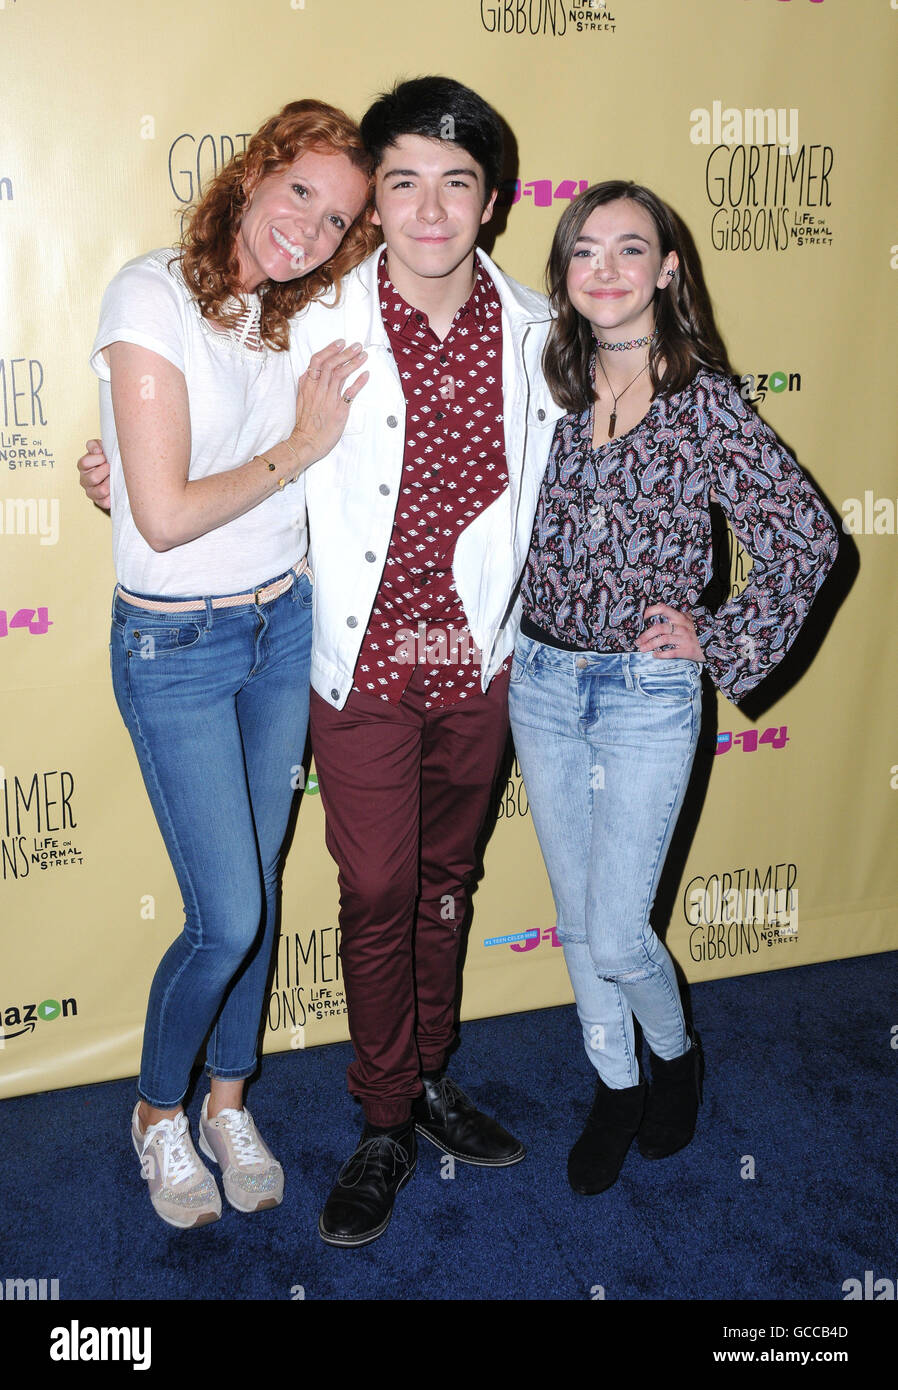 Burbank, CA, USA. 8th July, 2016. 08 July 2016 - Burbank. Robyn Lively, Sloane Morgan Siegel, Ashley Boettcher. Arrivals for the Celebration of Amazon's ''Gortimer Gibbon's Life On Normal Street'' Season 2 premiere held at Racer's Edge Indoor Karting. Photo Credit: Birdie Thompson/AdMedia Credit:  Birdie Thompson/AdMedia/ZUMA Wire/Alamy Live News Stock Photo